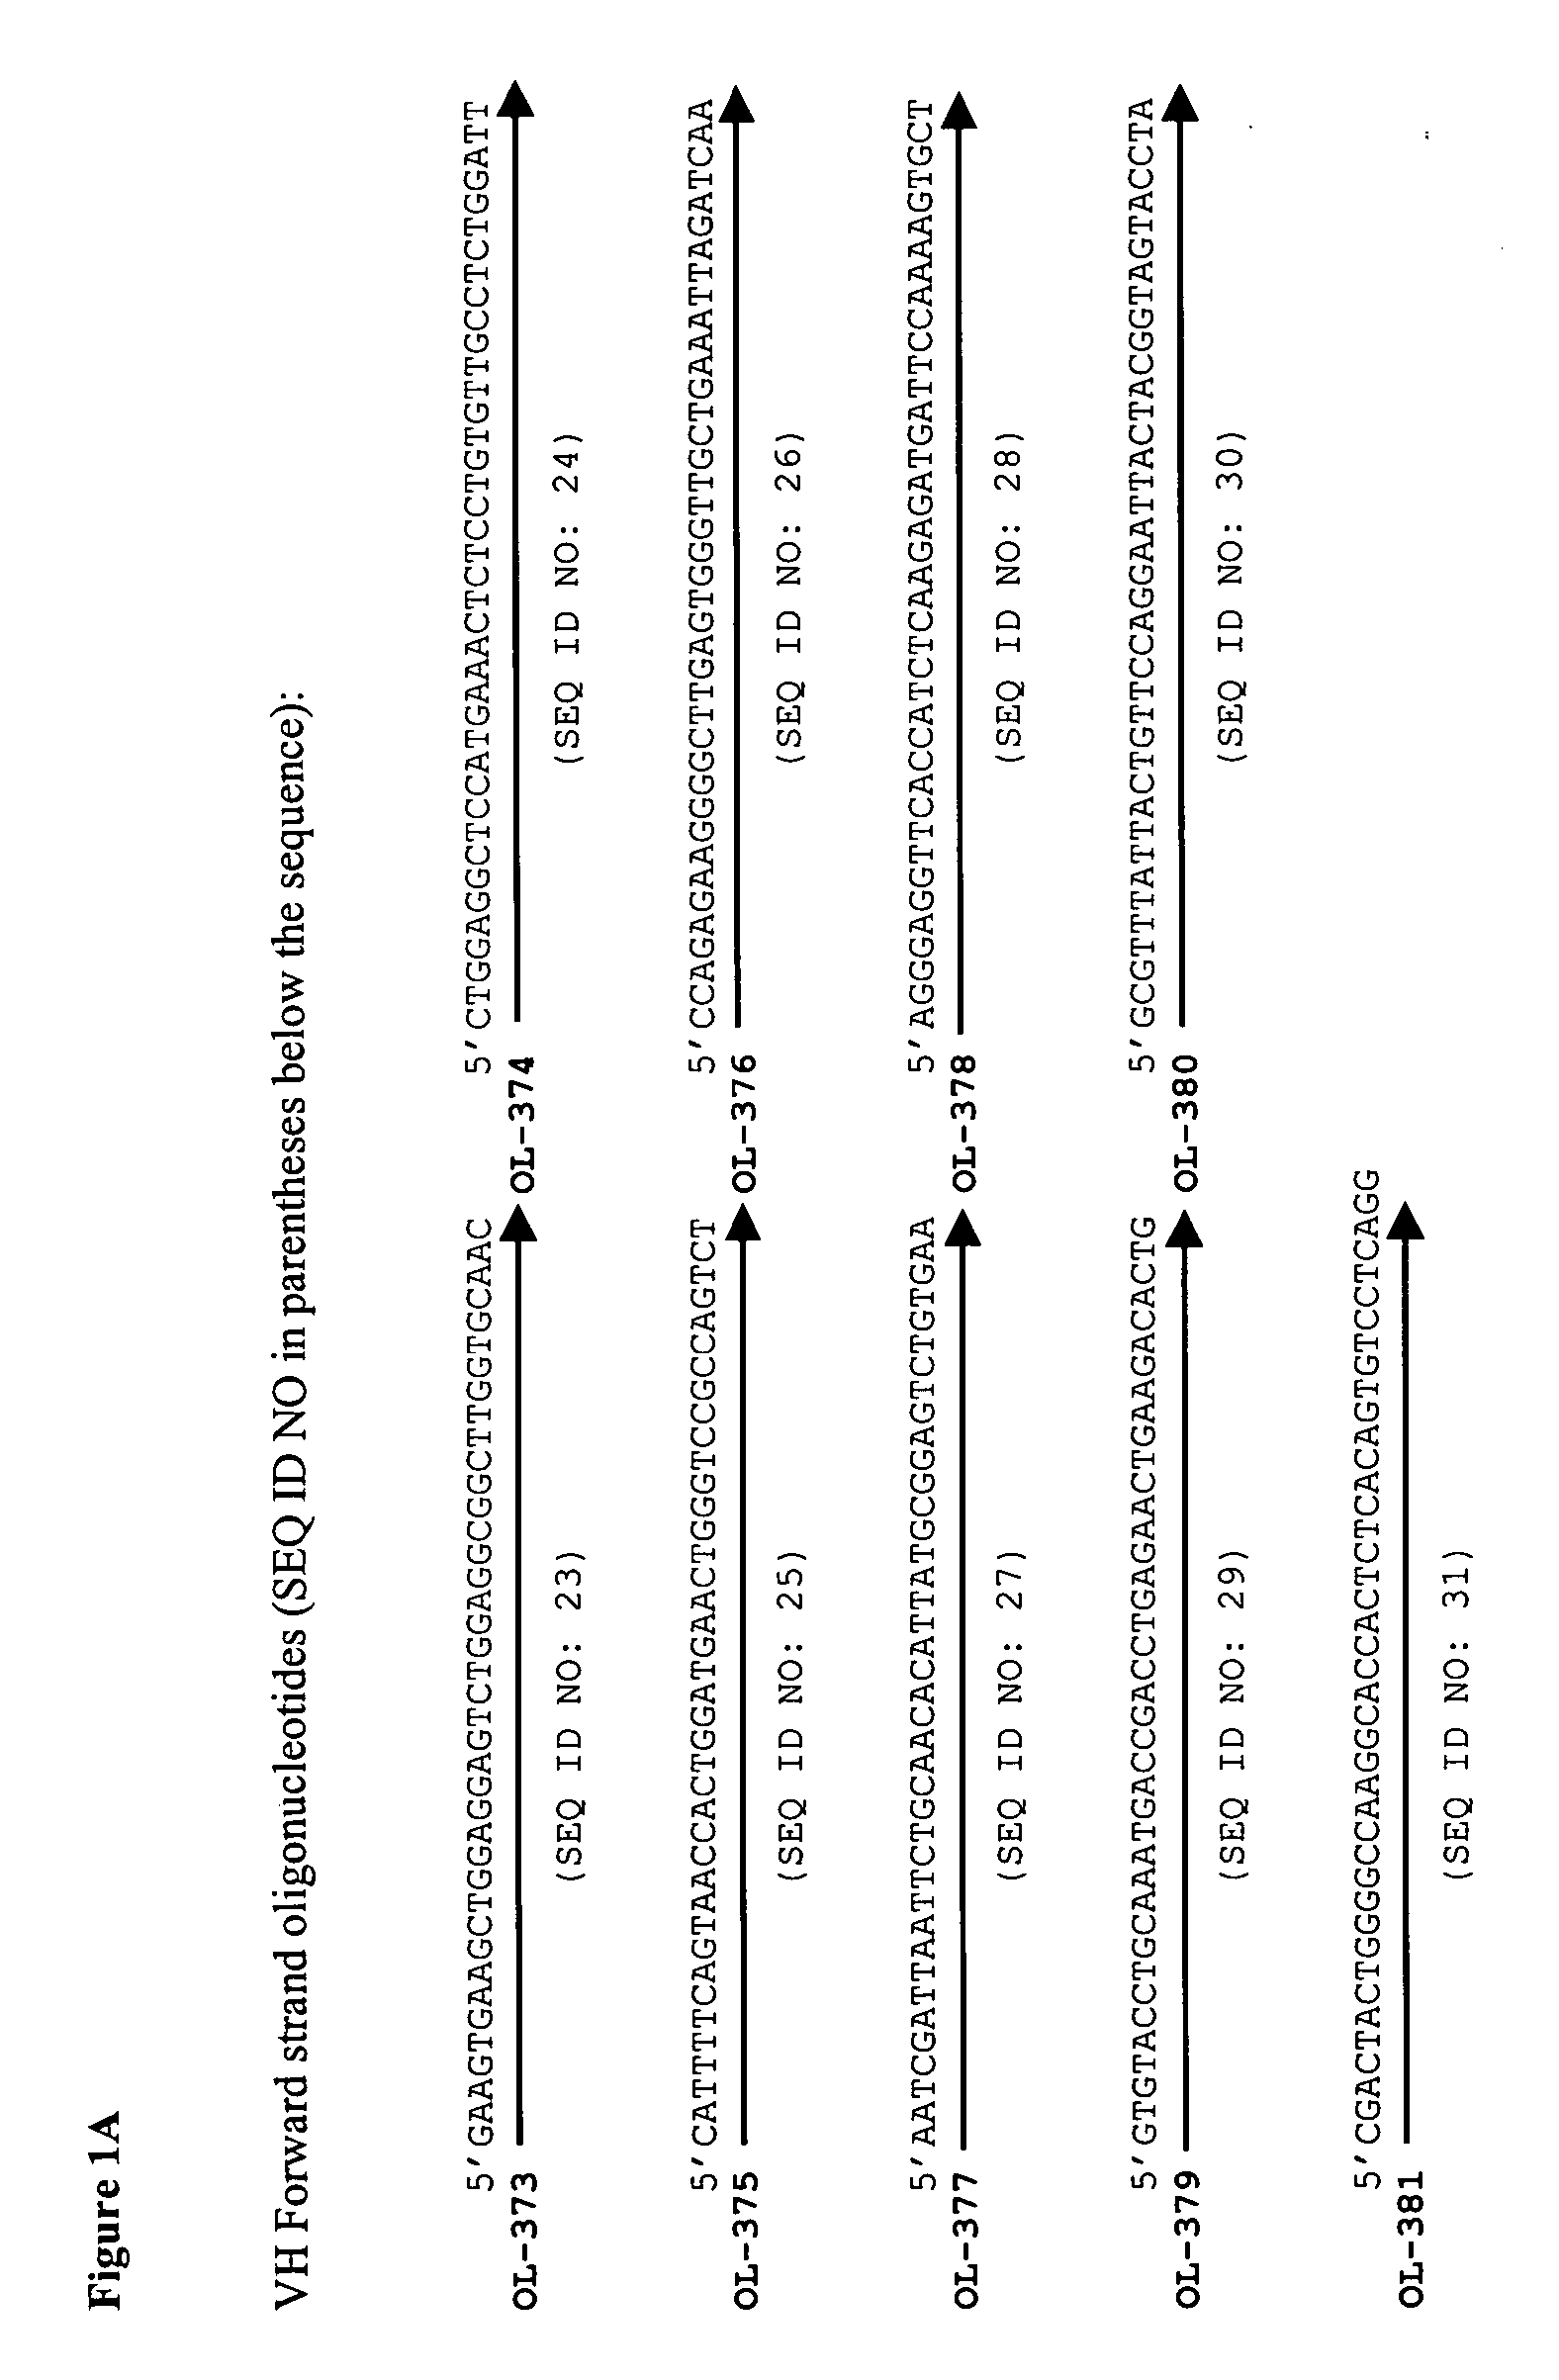 TNF alpha-binding polypeptide compositions and methods